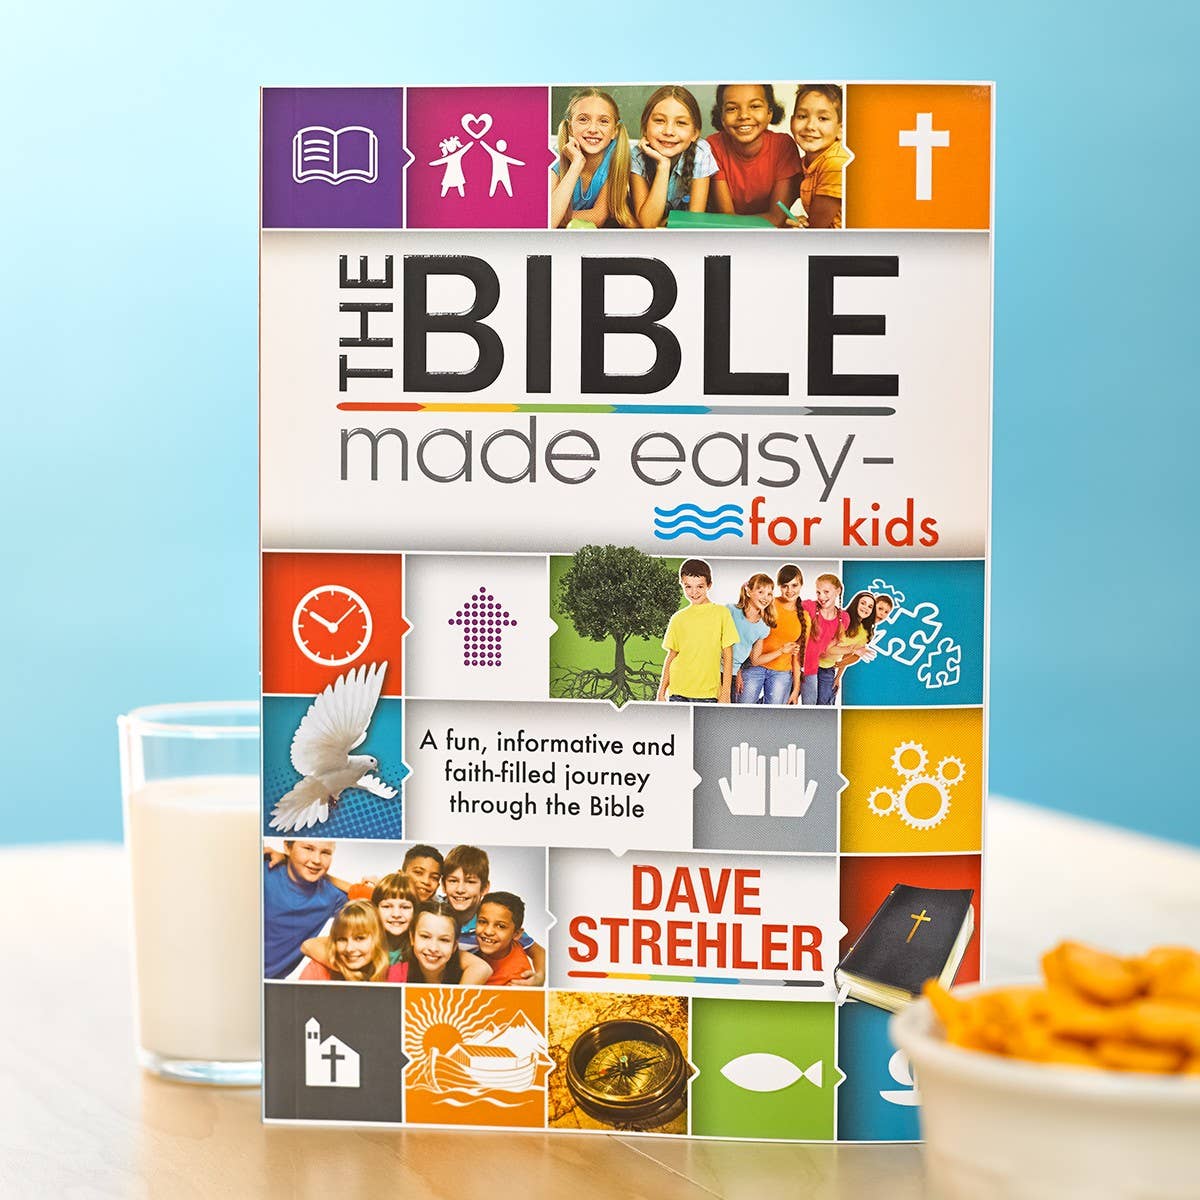 The Bible Made Easy - for Kids